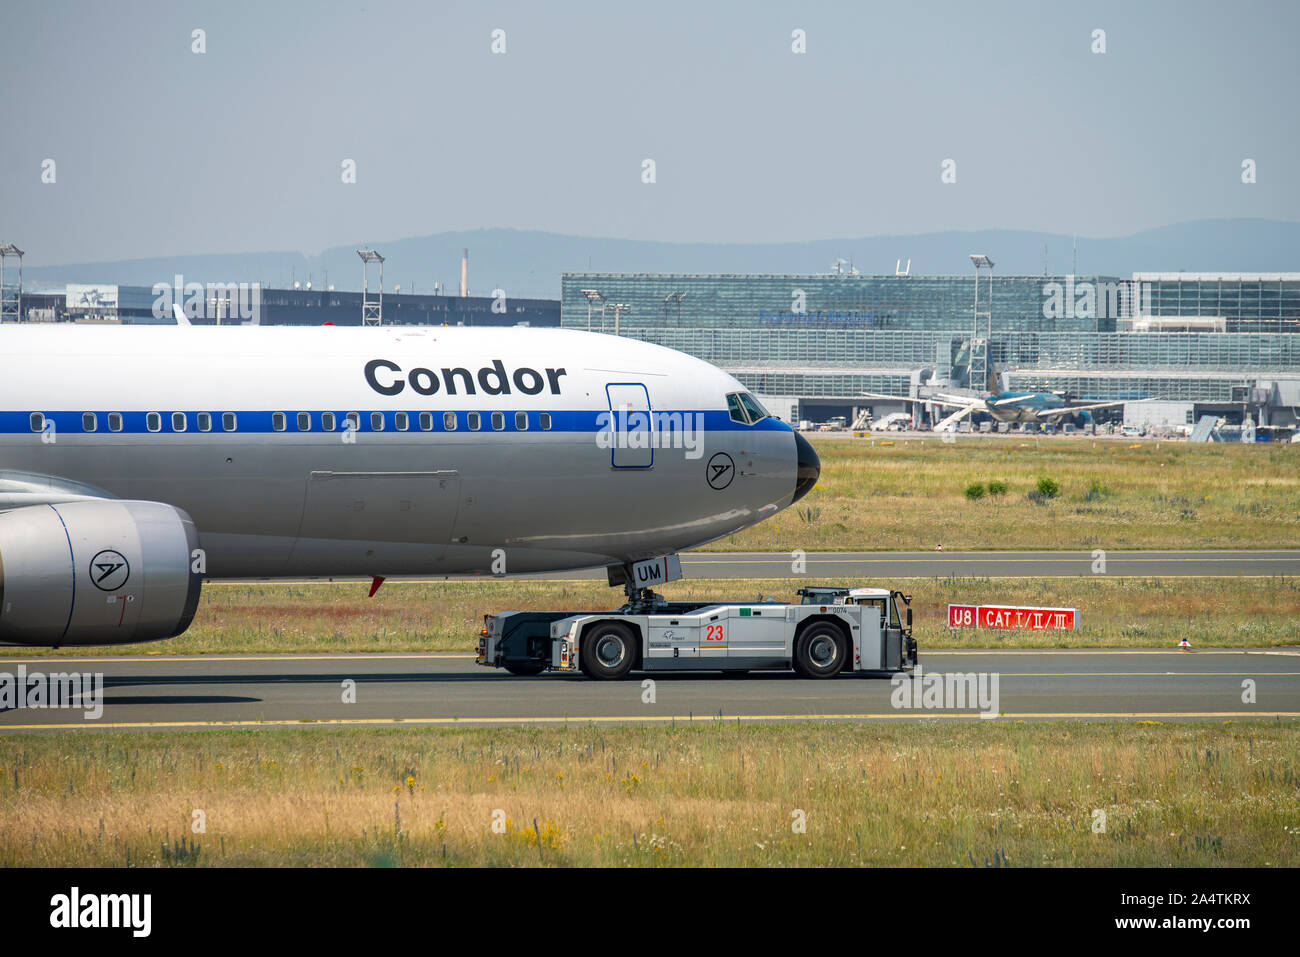 Frankfurt, Hesse/Germany - June 26 2019Condor aircraft with a special painting (Boeing 767-300 - D-ABUM) is towed by an aircraft tractor at Frankfurt Stock Photo